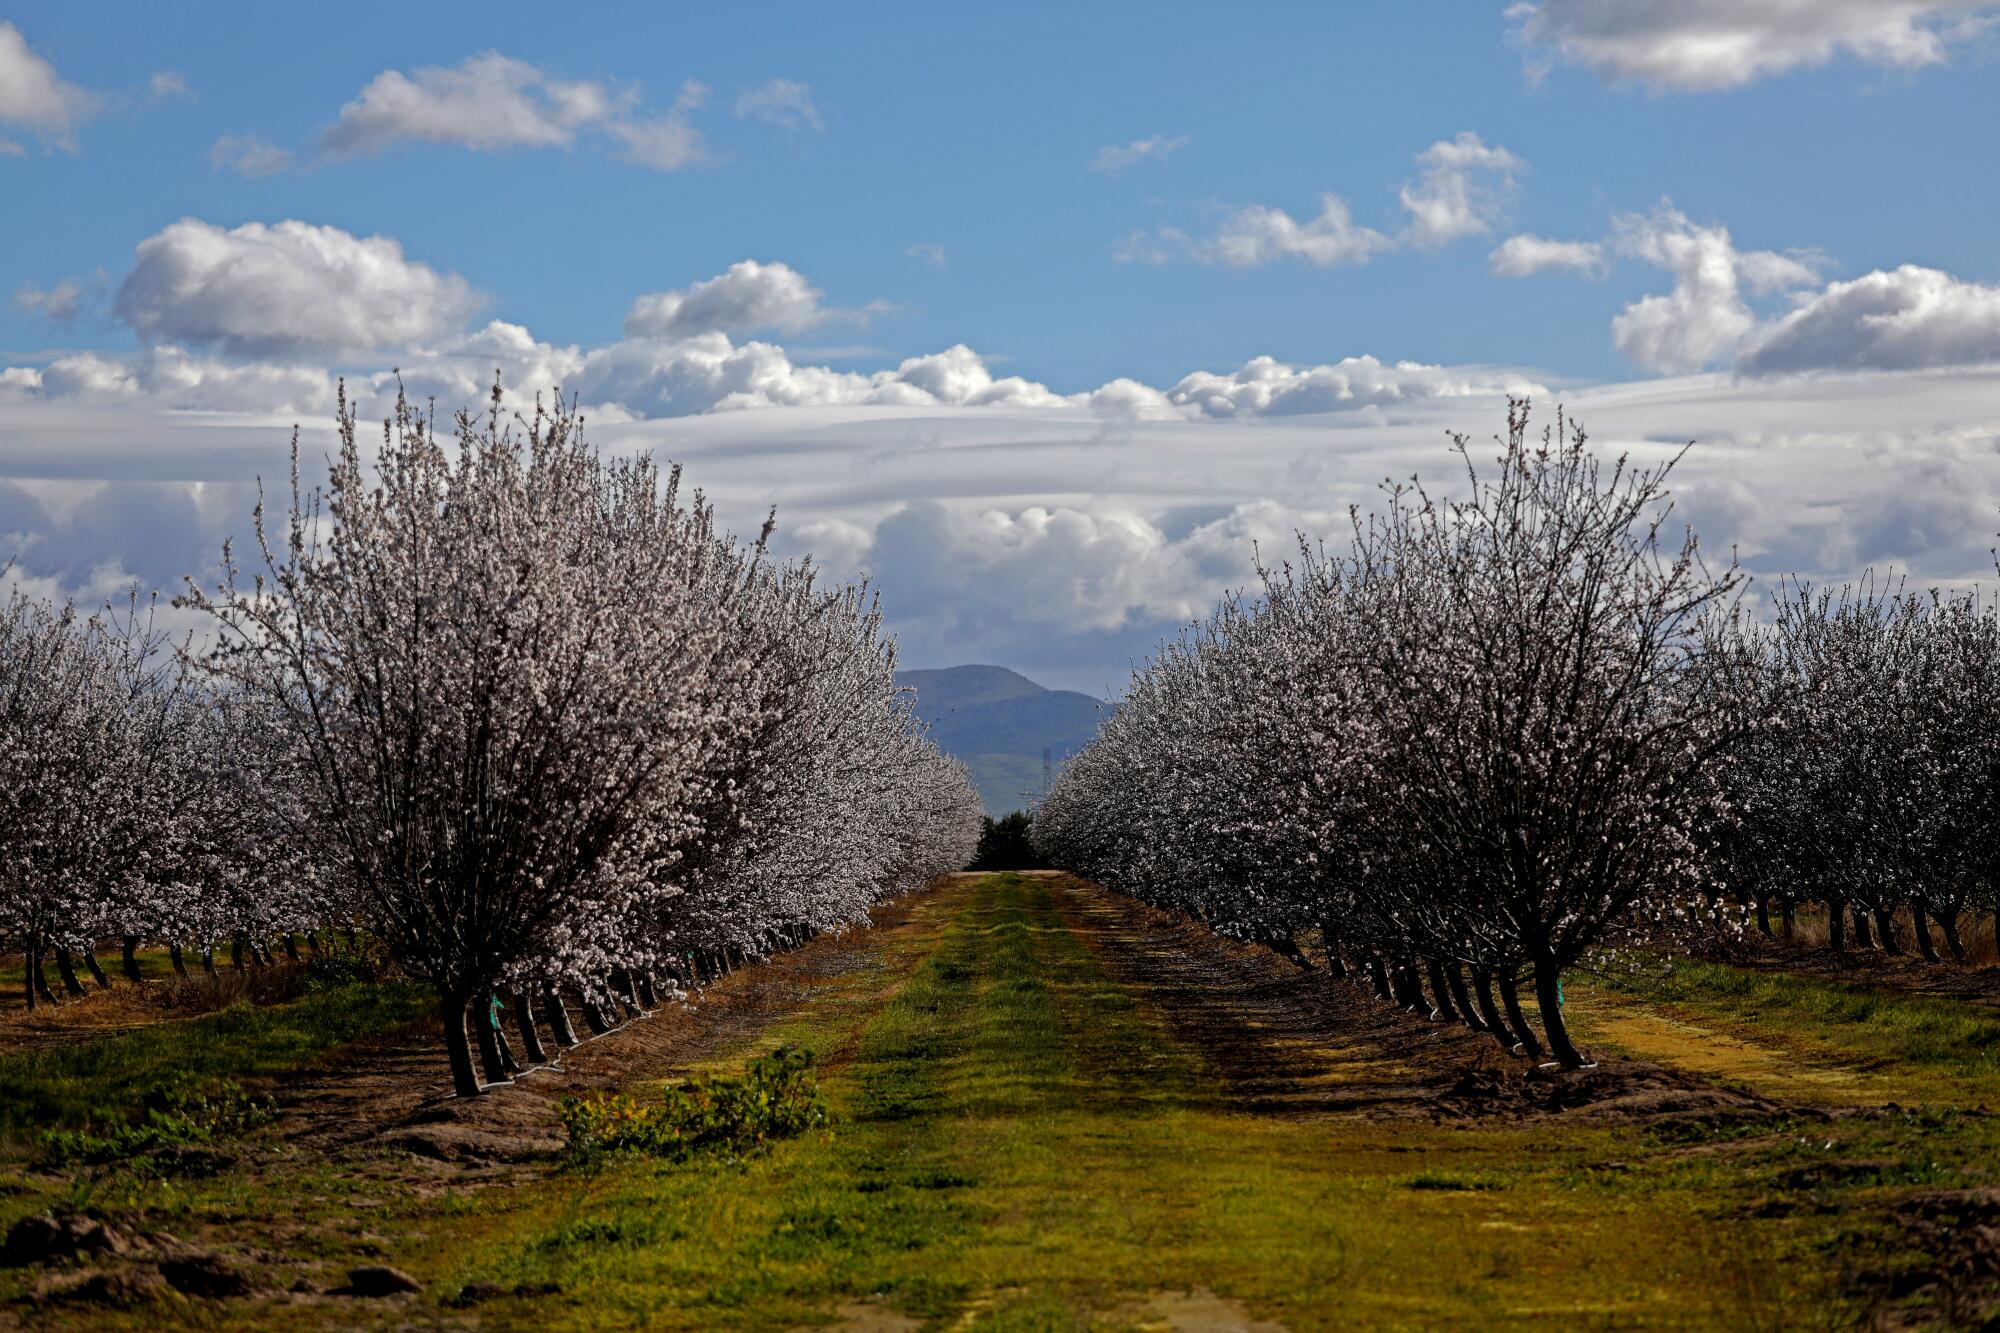 Blooming almond orchards spread out near the Tombstone neighborhood in unincorporated Fresno County